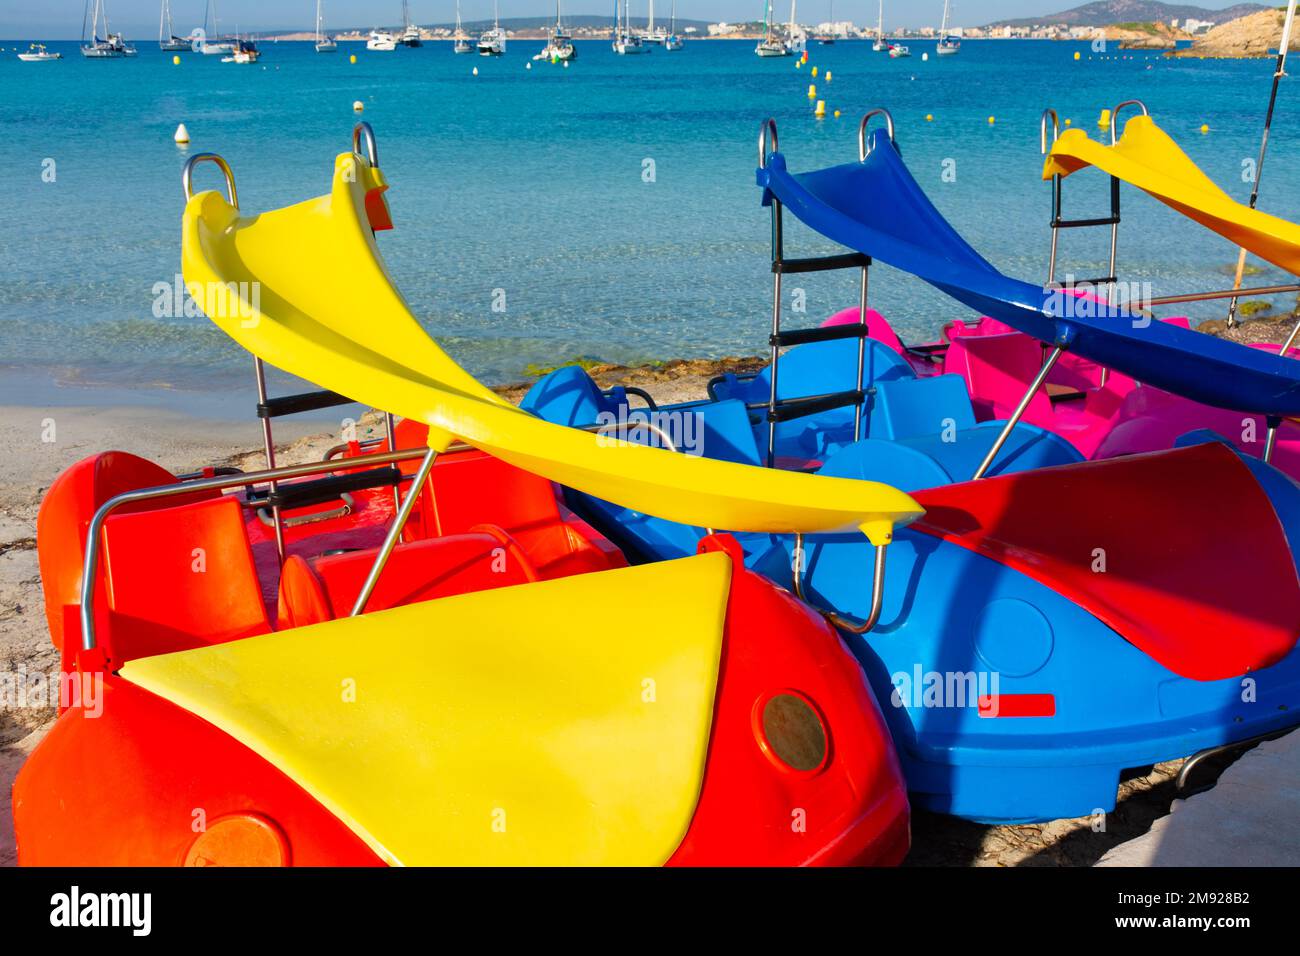 Colorful pedal boats on the sand in the Xinxell cove, moored sailboats and Palmanova at background, in Majorca, Balearic islands, Spain Stock Photo